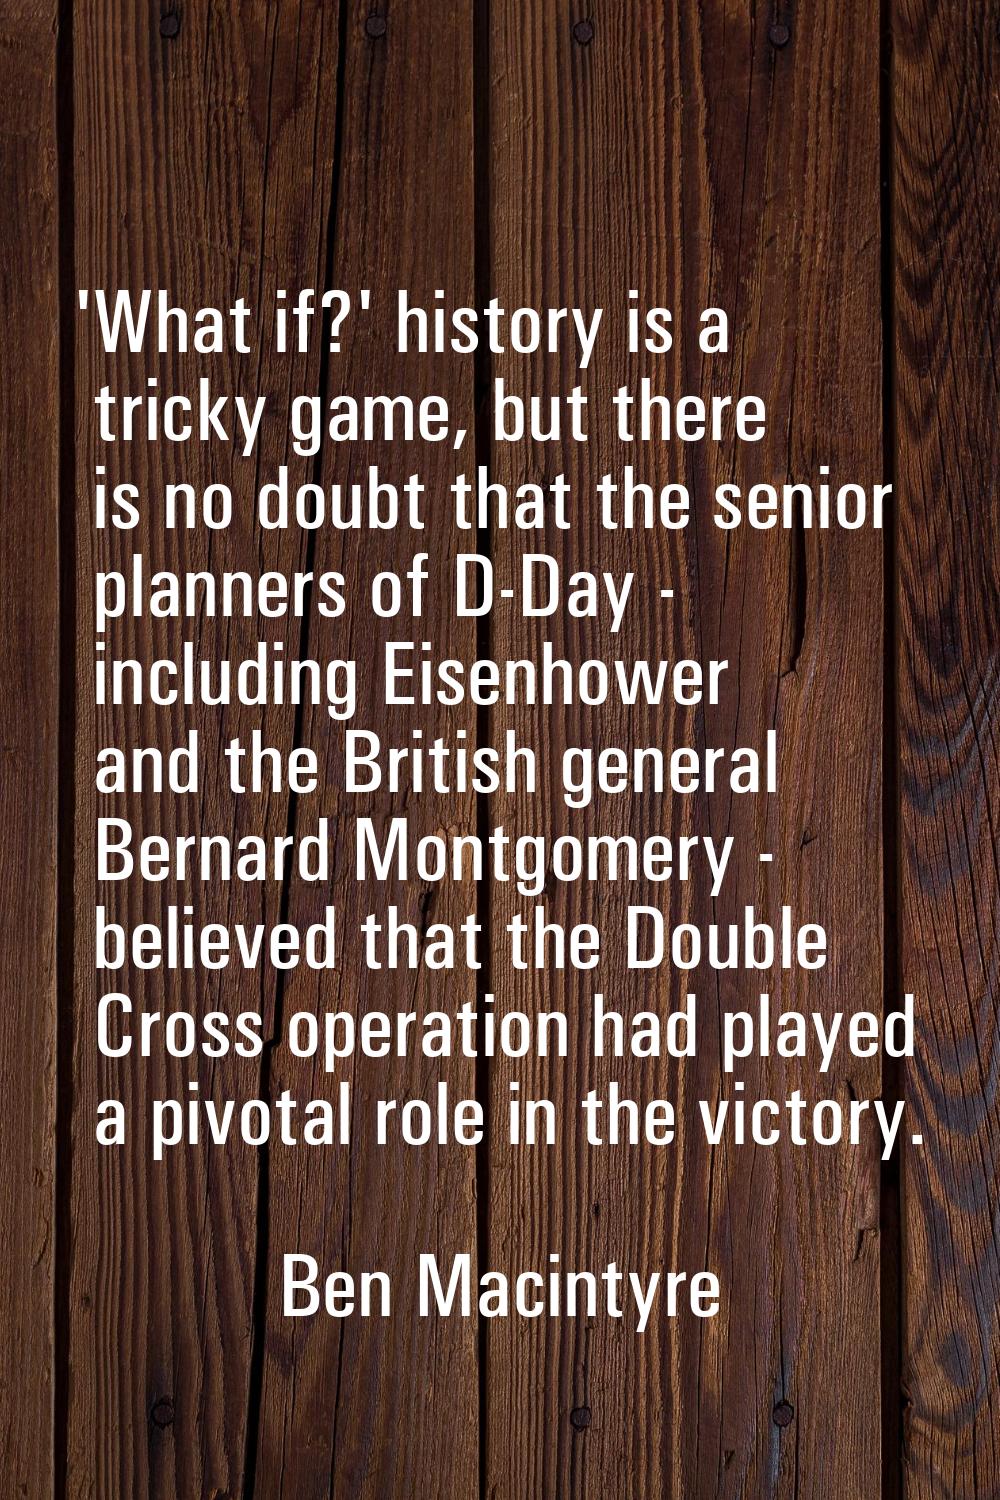 'What if?' history is a tricky game, but there is no doubt that the senior planners of D-Day - incl